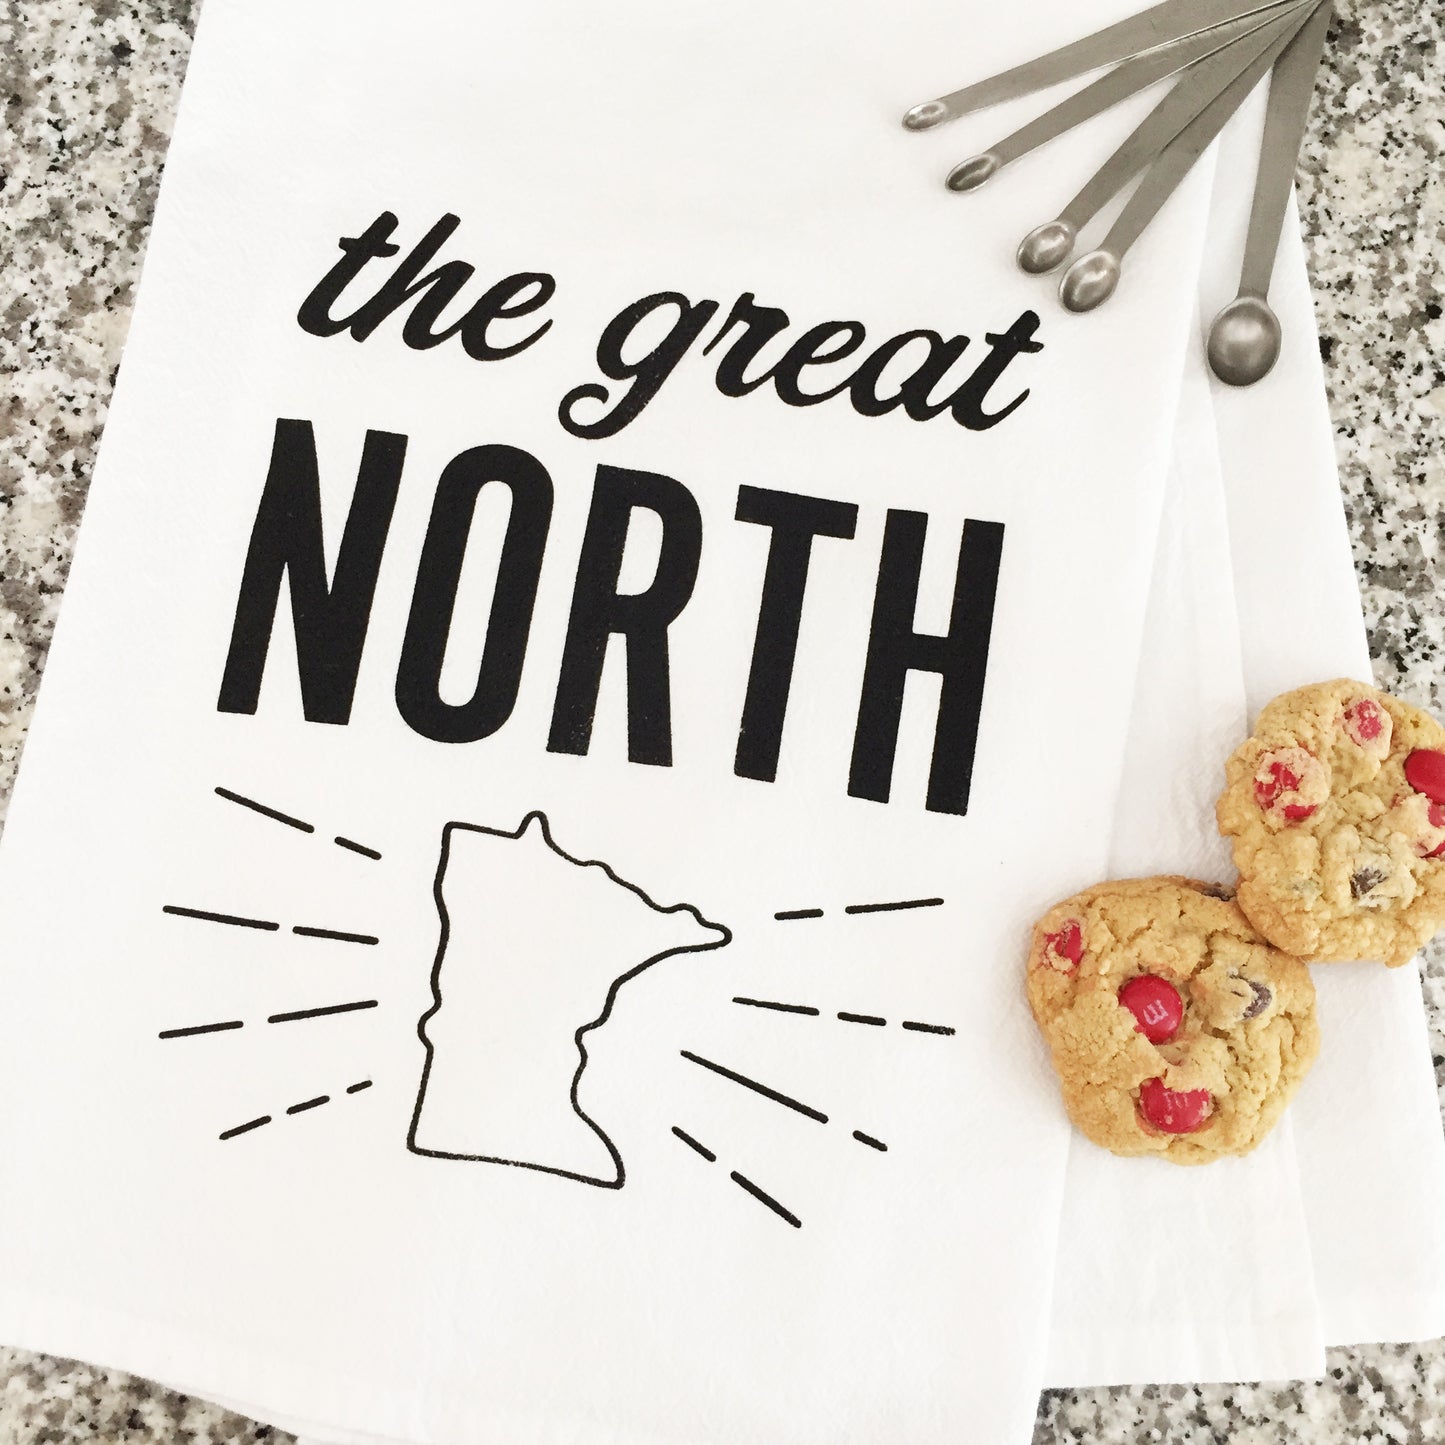 The Great North Kitchen Towel